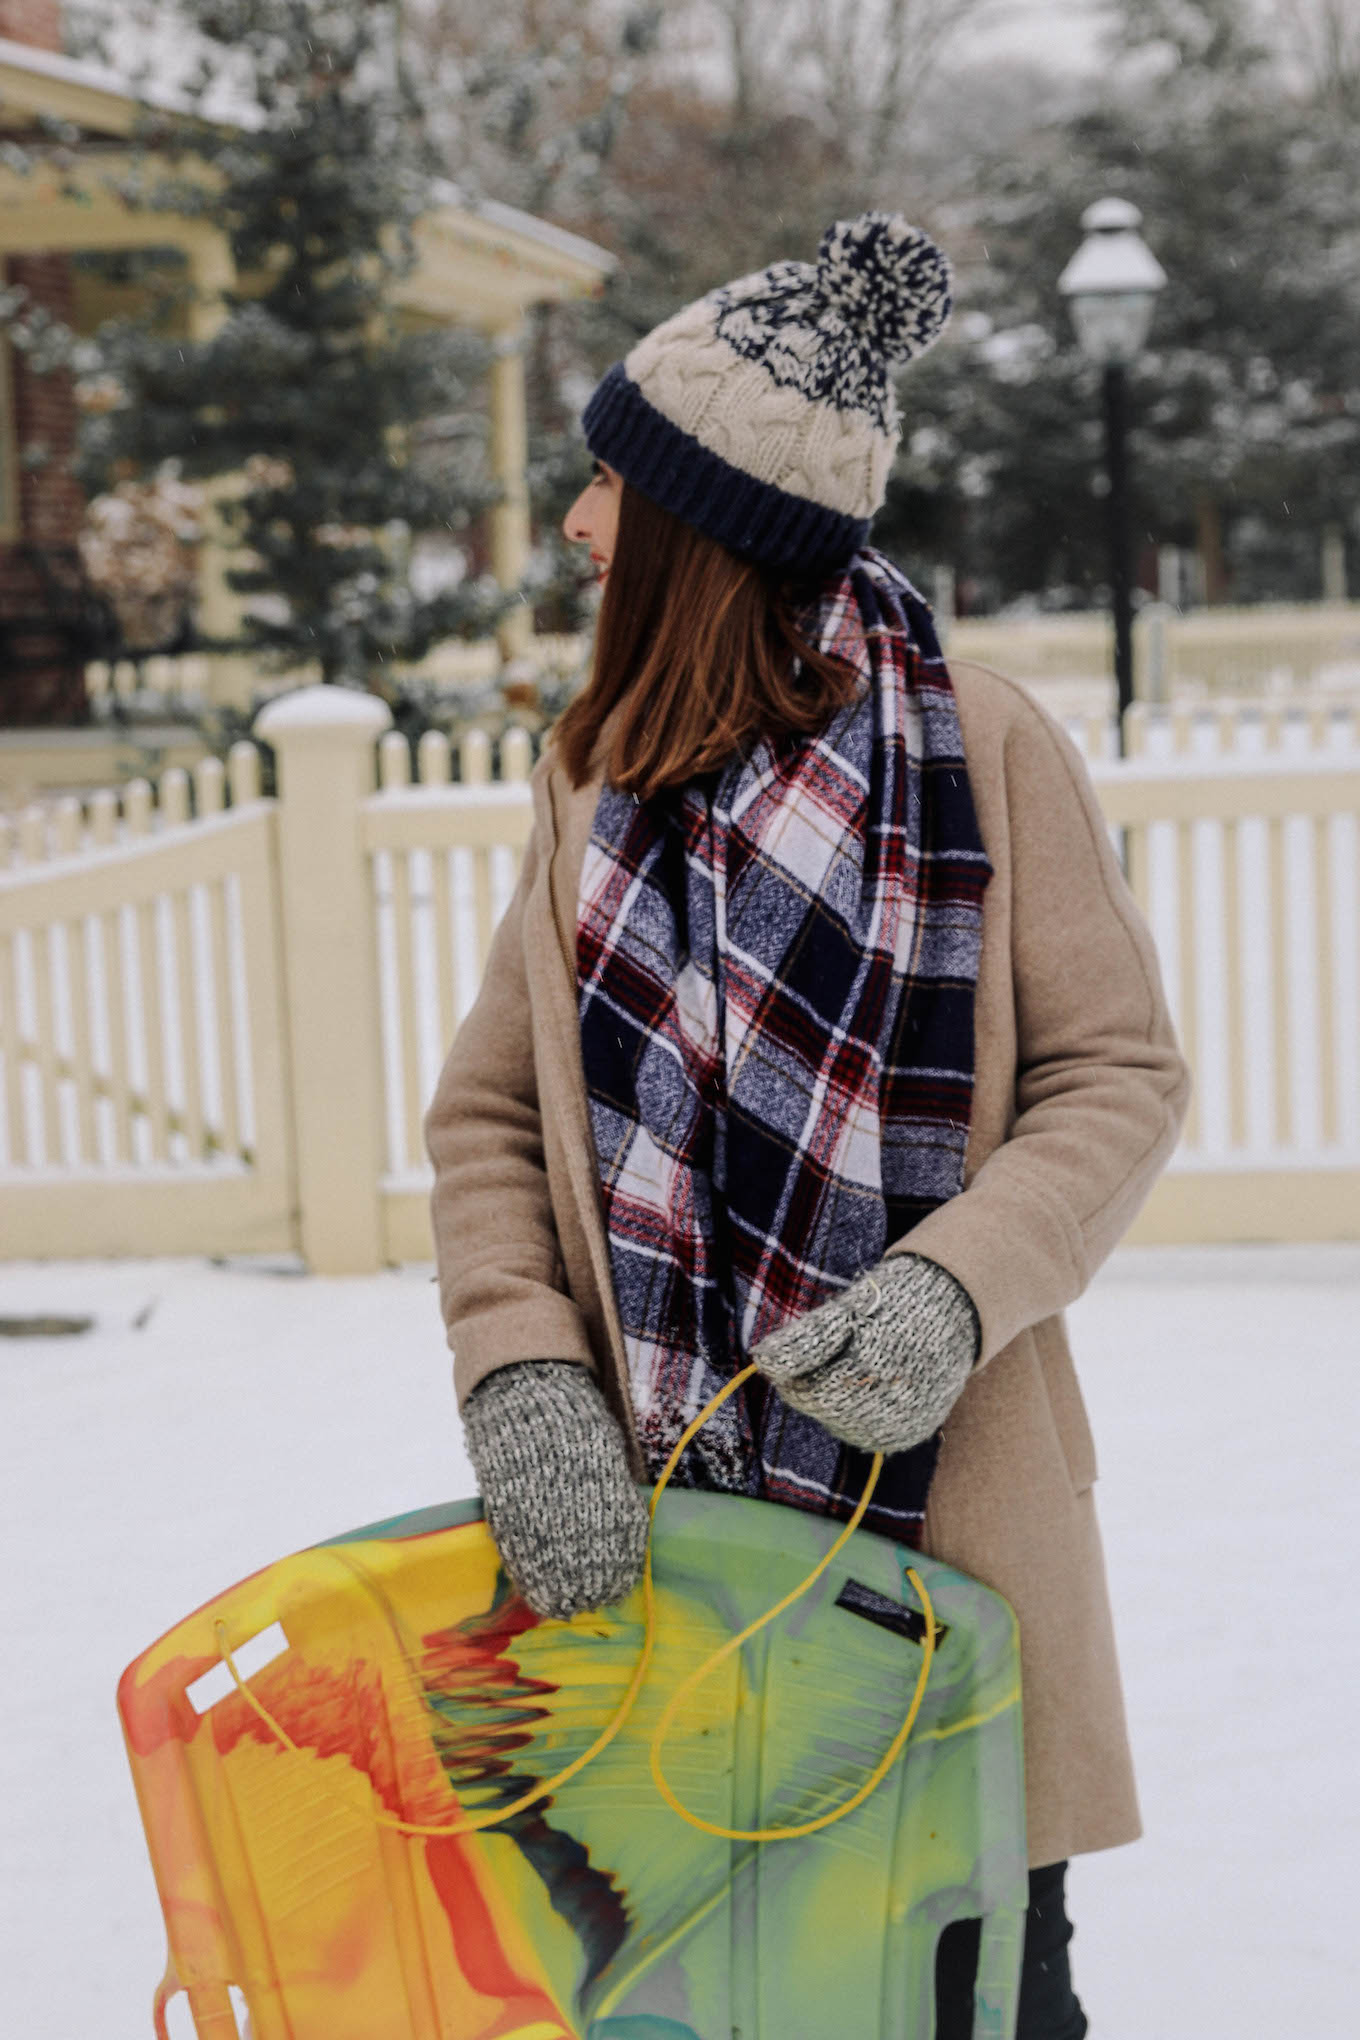 Best Ways To Spend a New England Snow Day | The Coastal Confidence